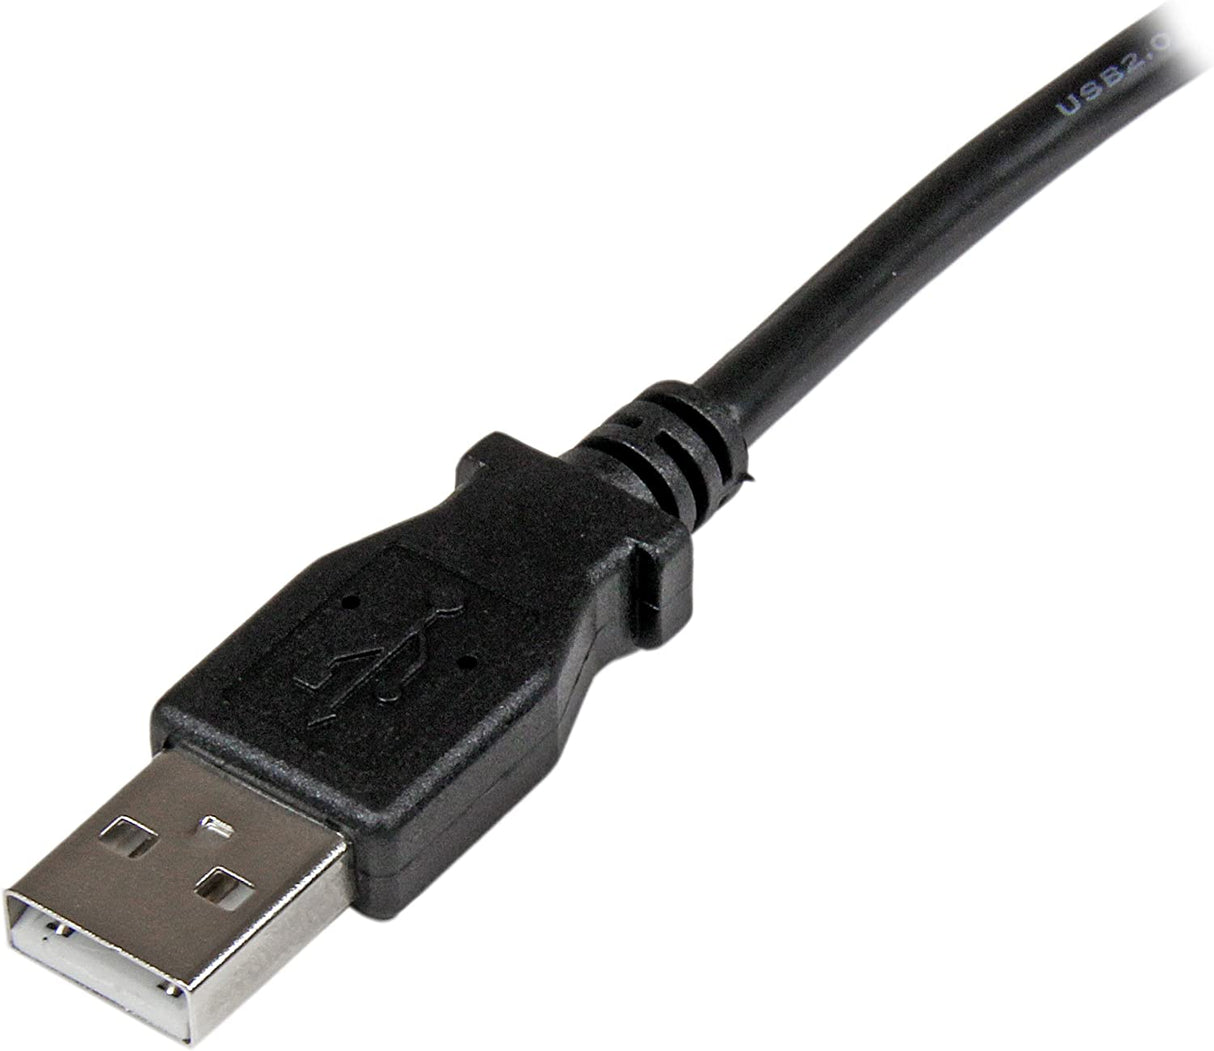 StarTech.com 2m USB 2.0 A to Left Angle B Cable Cord - 2 m USB Printer Cable - Left Angle USB B Cable - 1x USB A (M), 1x USB B (M) (USBAB2ML),Black Left Angled Connector 6 ft / 2m